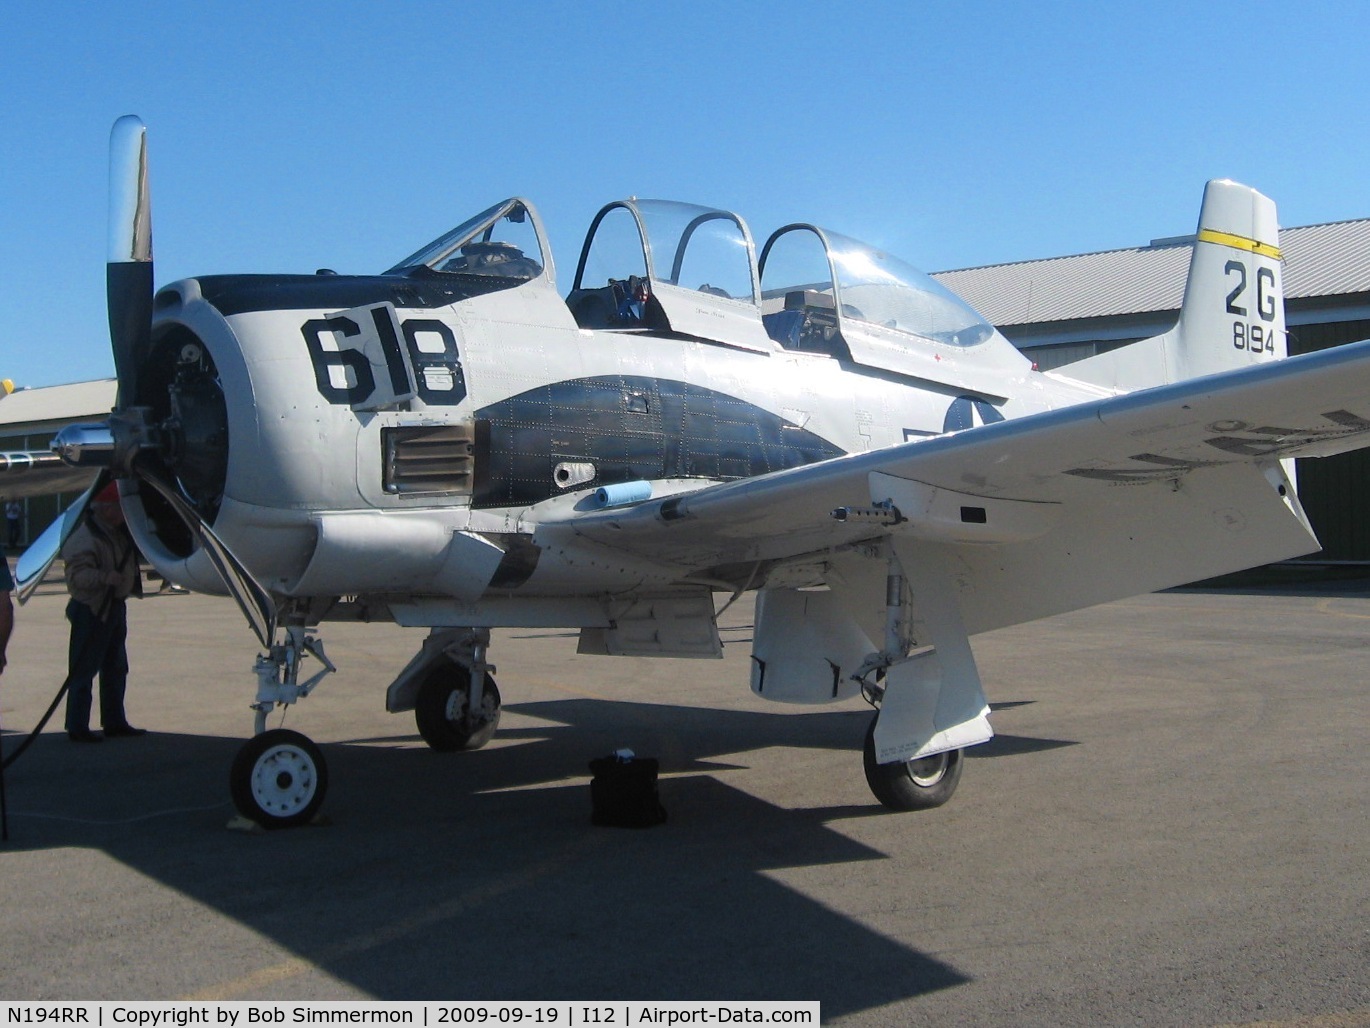 N194RR, North American T-28B Trojan C/N 200-265 (138194), On the ramp at Sidney, Ohio during the EAA fly-in.